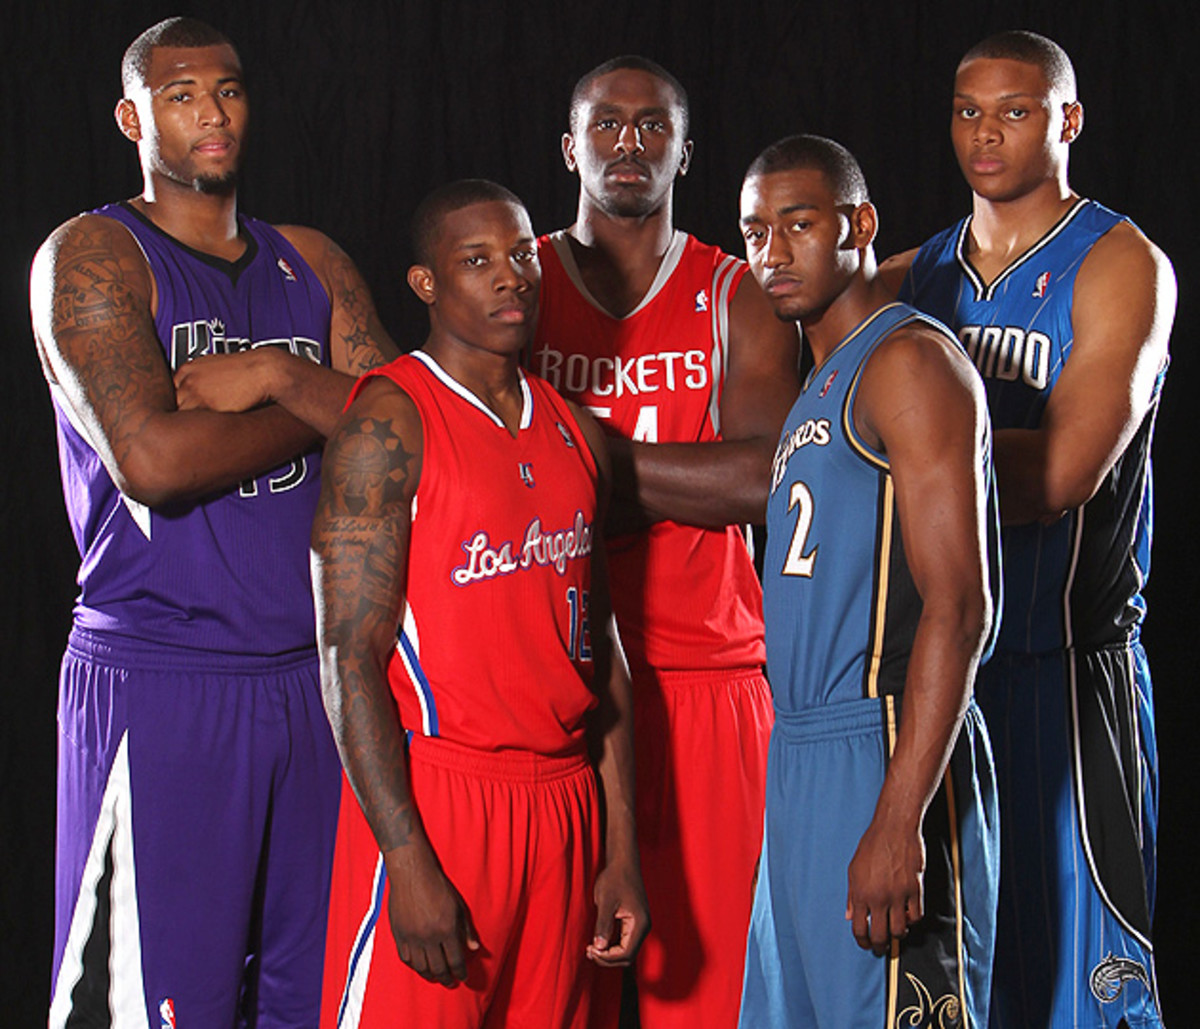 Left to right at '10 rookie shoot: DeMarcus Cousins, Eric Bledsoe, Patrick Patterson, John Wall and Daniel Orton.